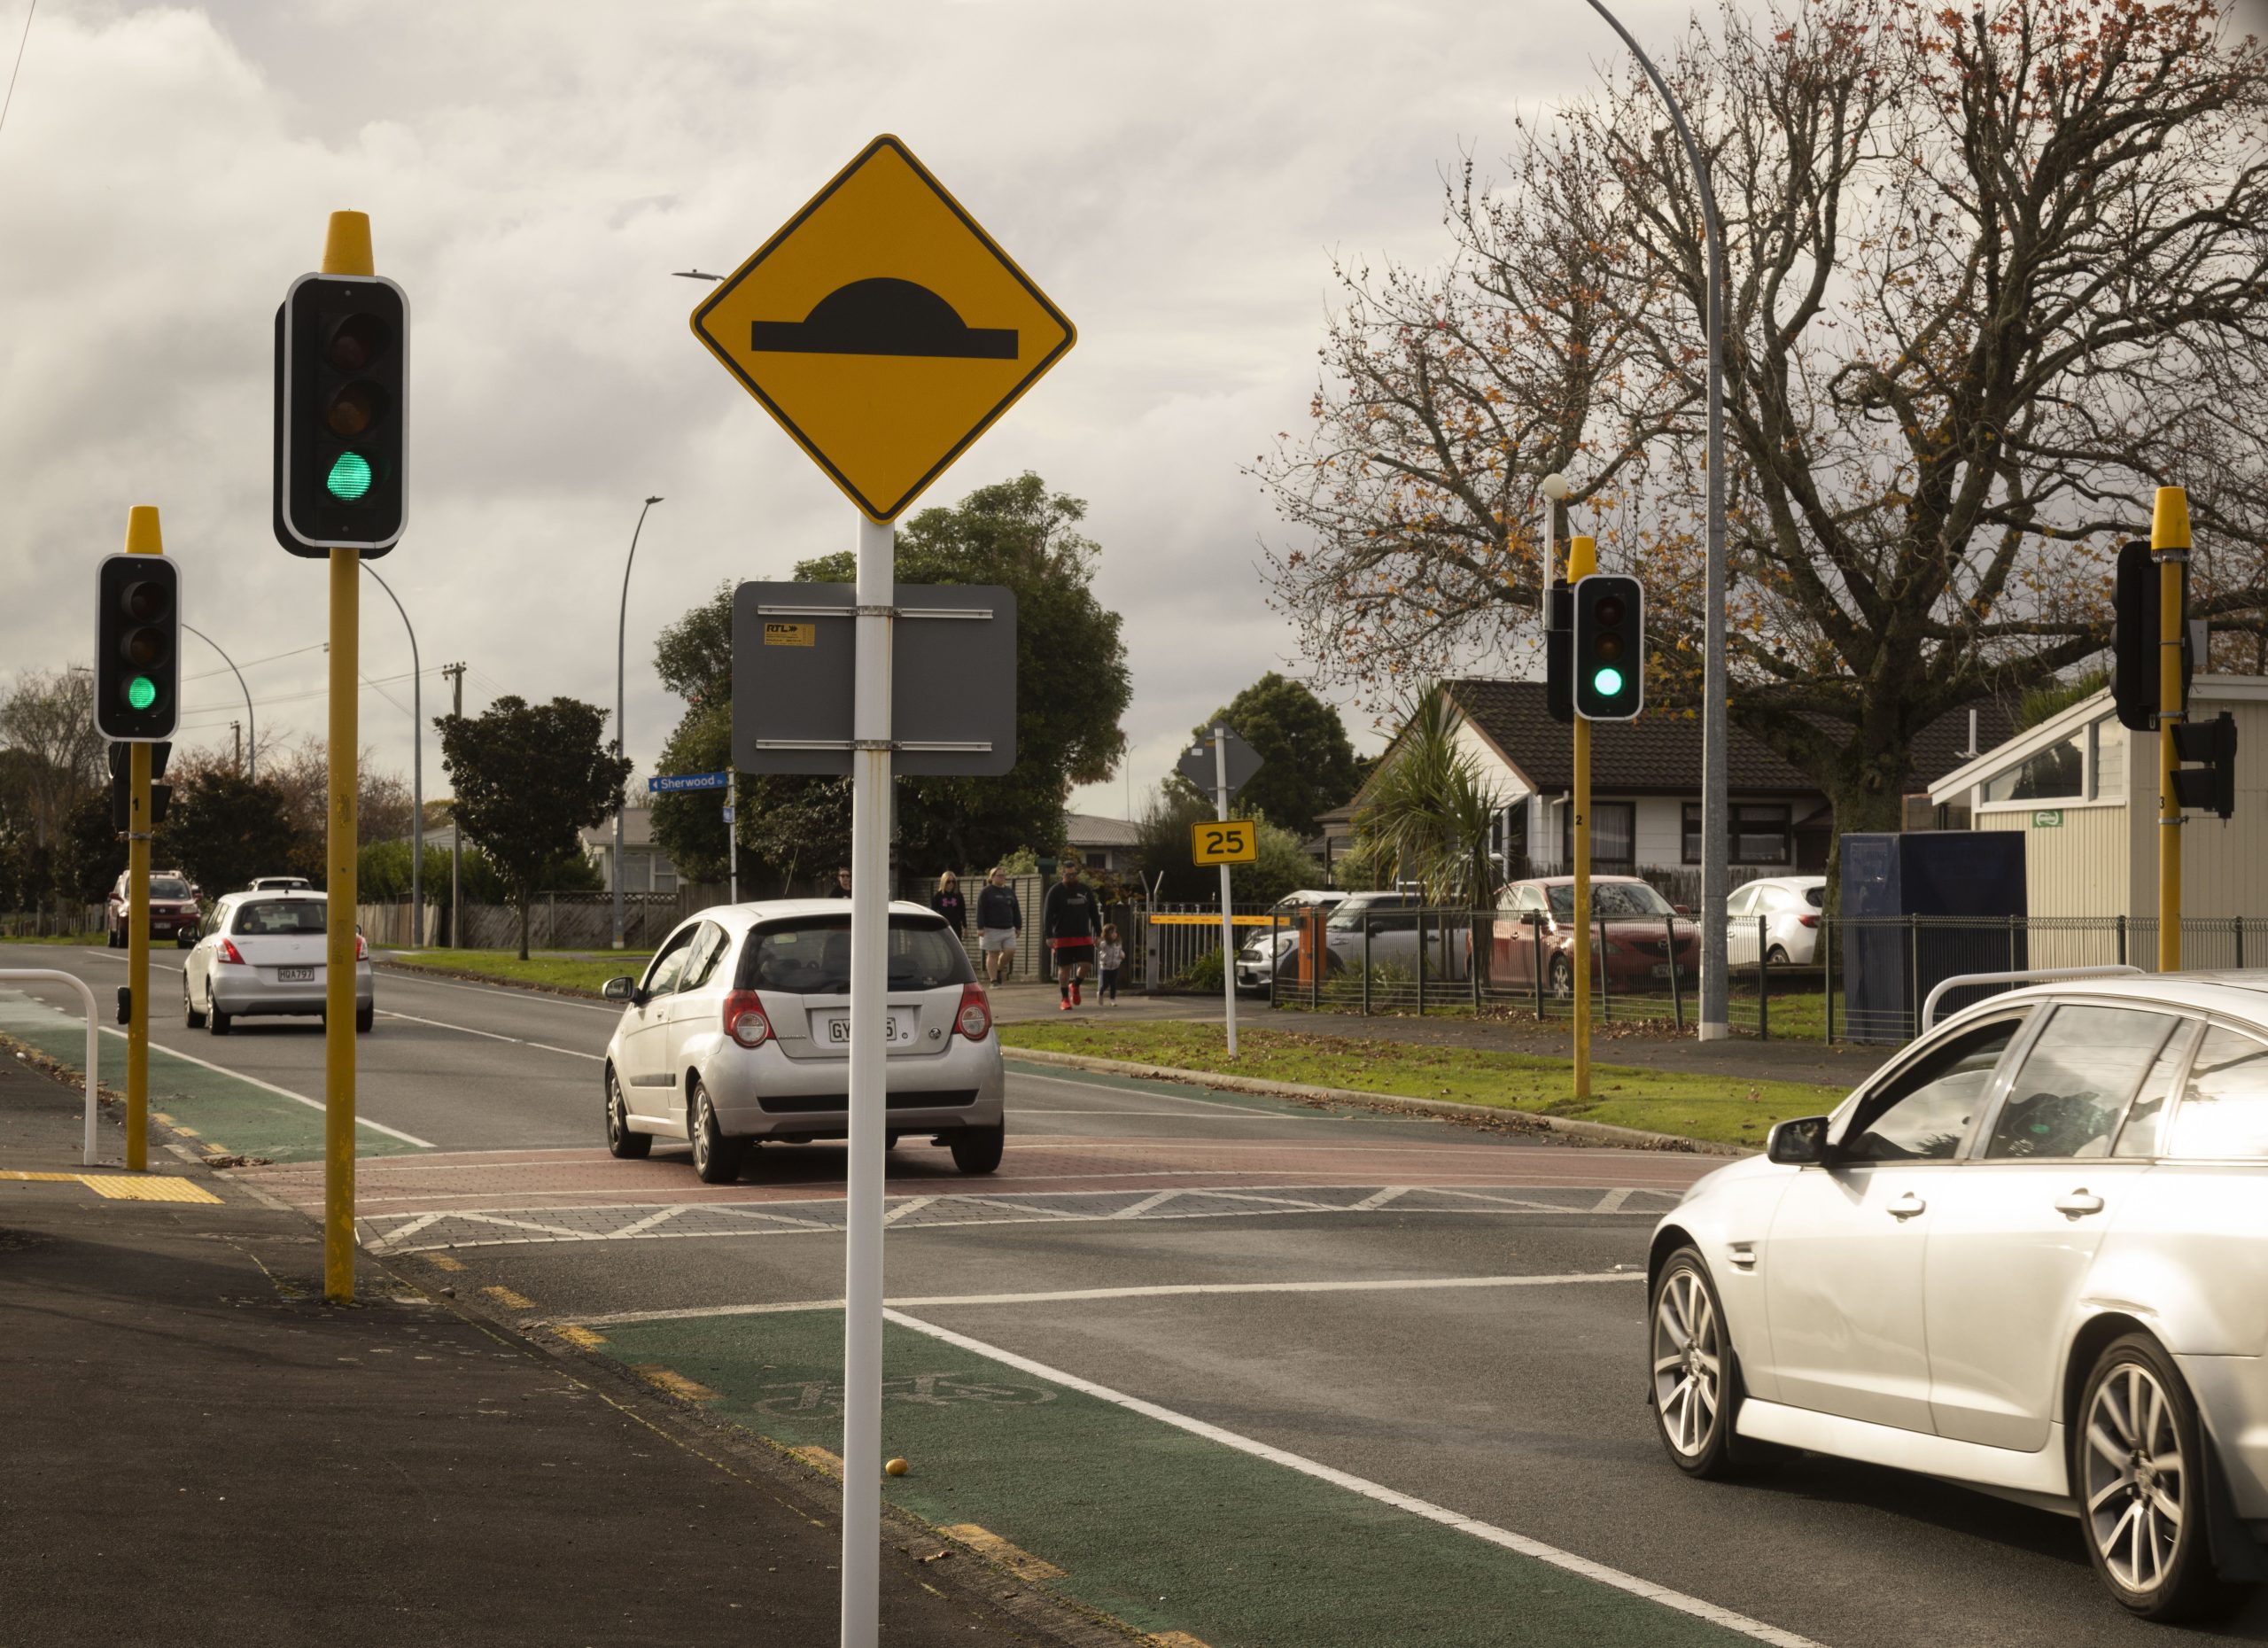 Auckland’s raised crossings ditched for new approach after criticism